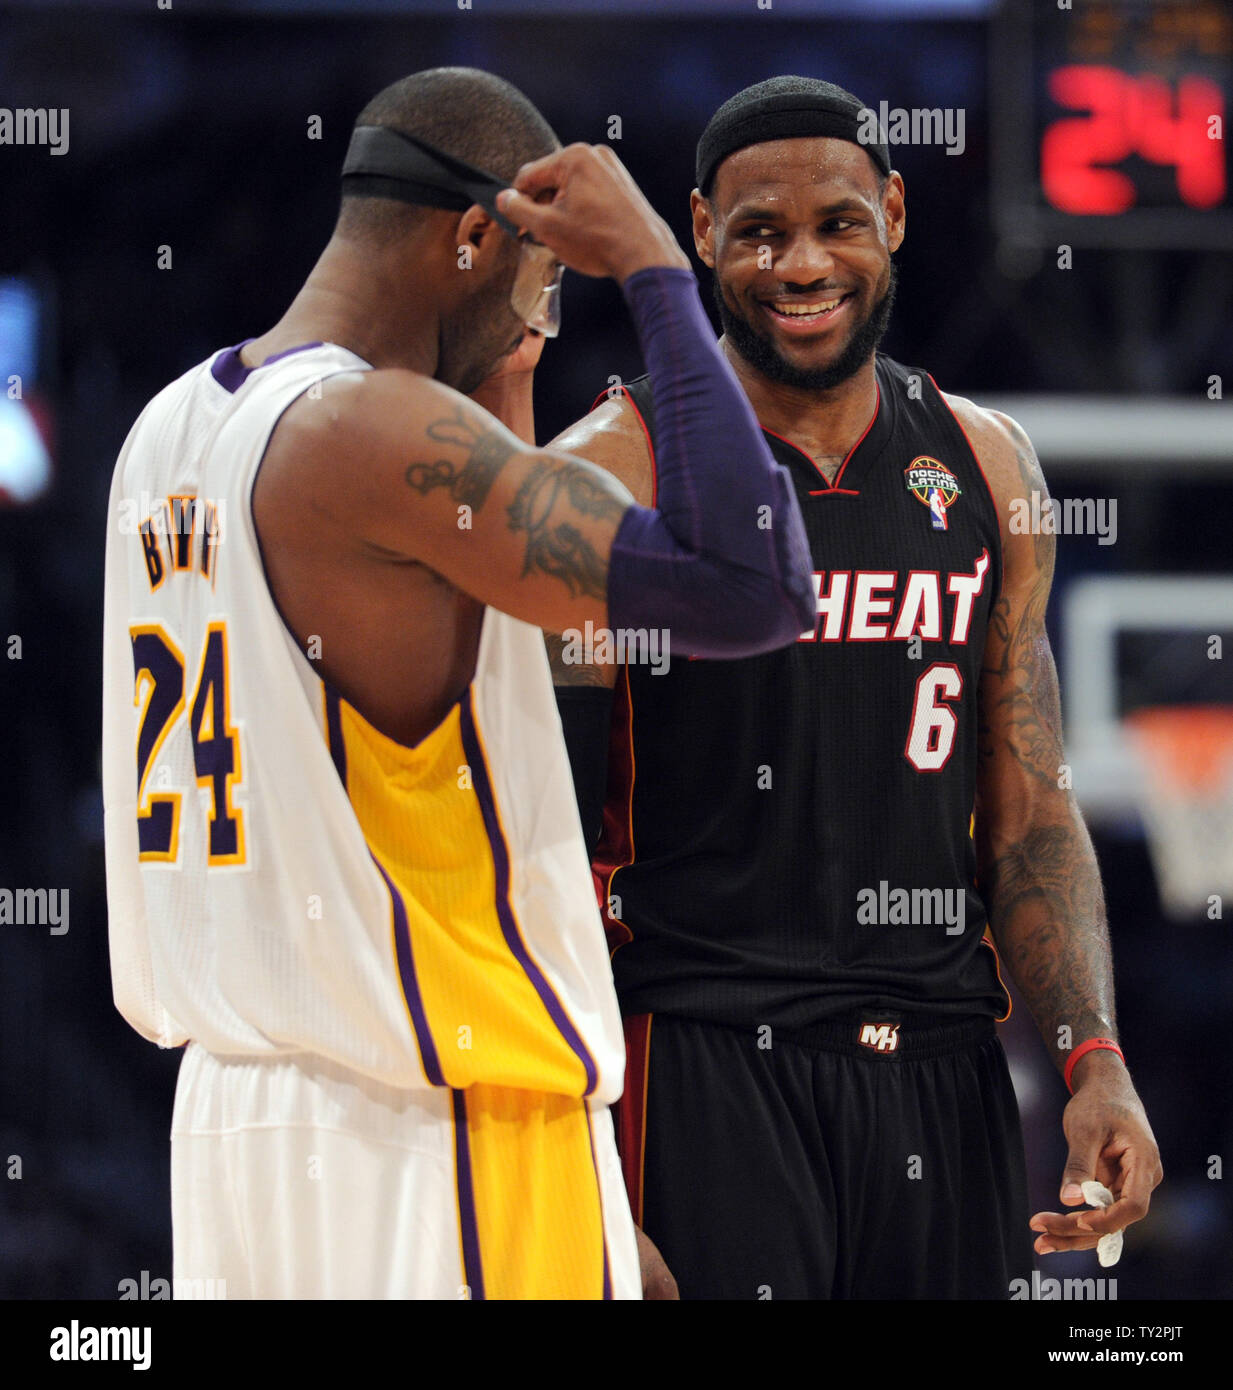 Los Angeles Lakers shooting guard Kobe Bryant (24) and Miami Heat small forward LeBron James (6) in the first half of  their NBA basketball game in Los Angeles on March 4, 2012.    UPI/Lori Shepler Stock Photo